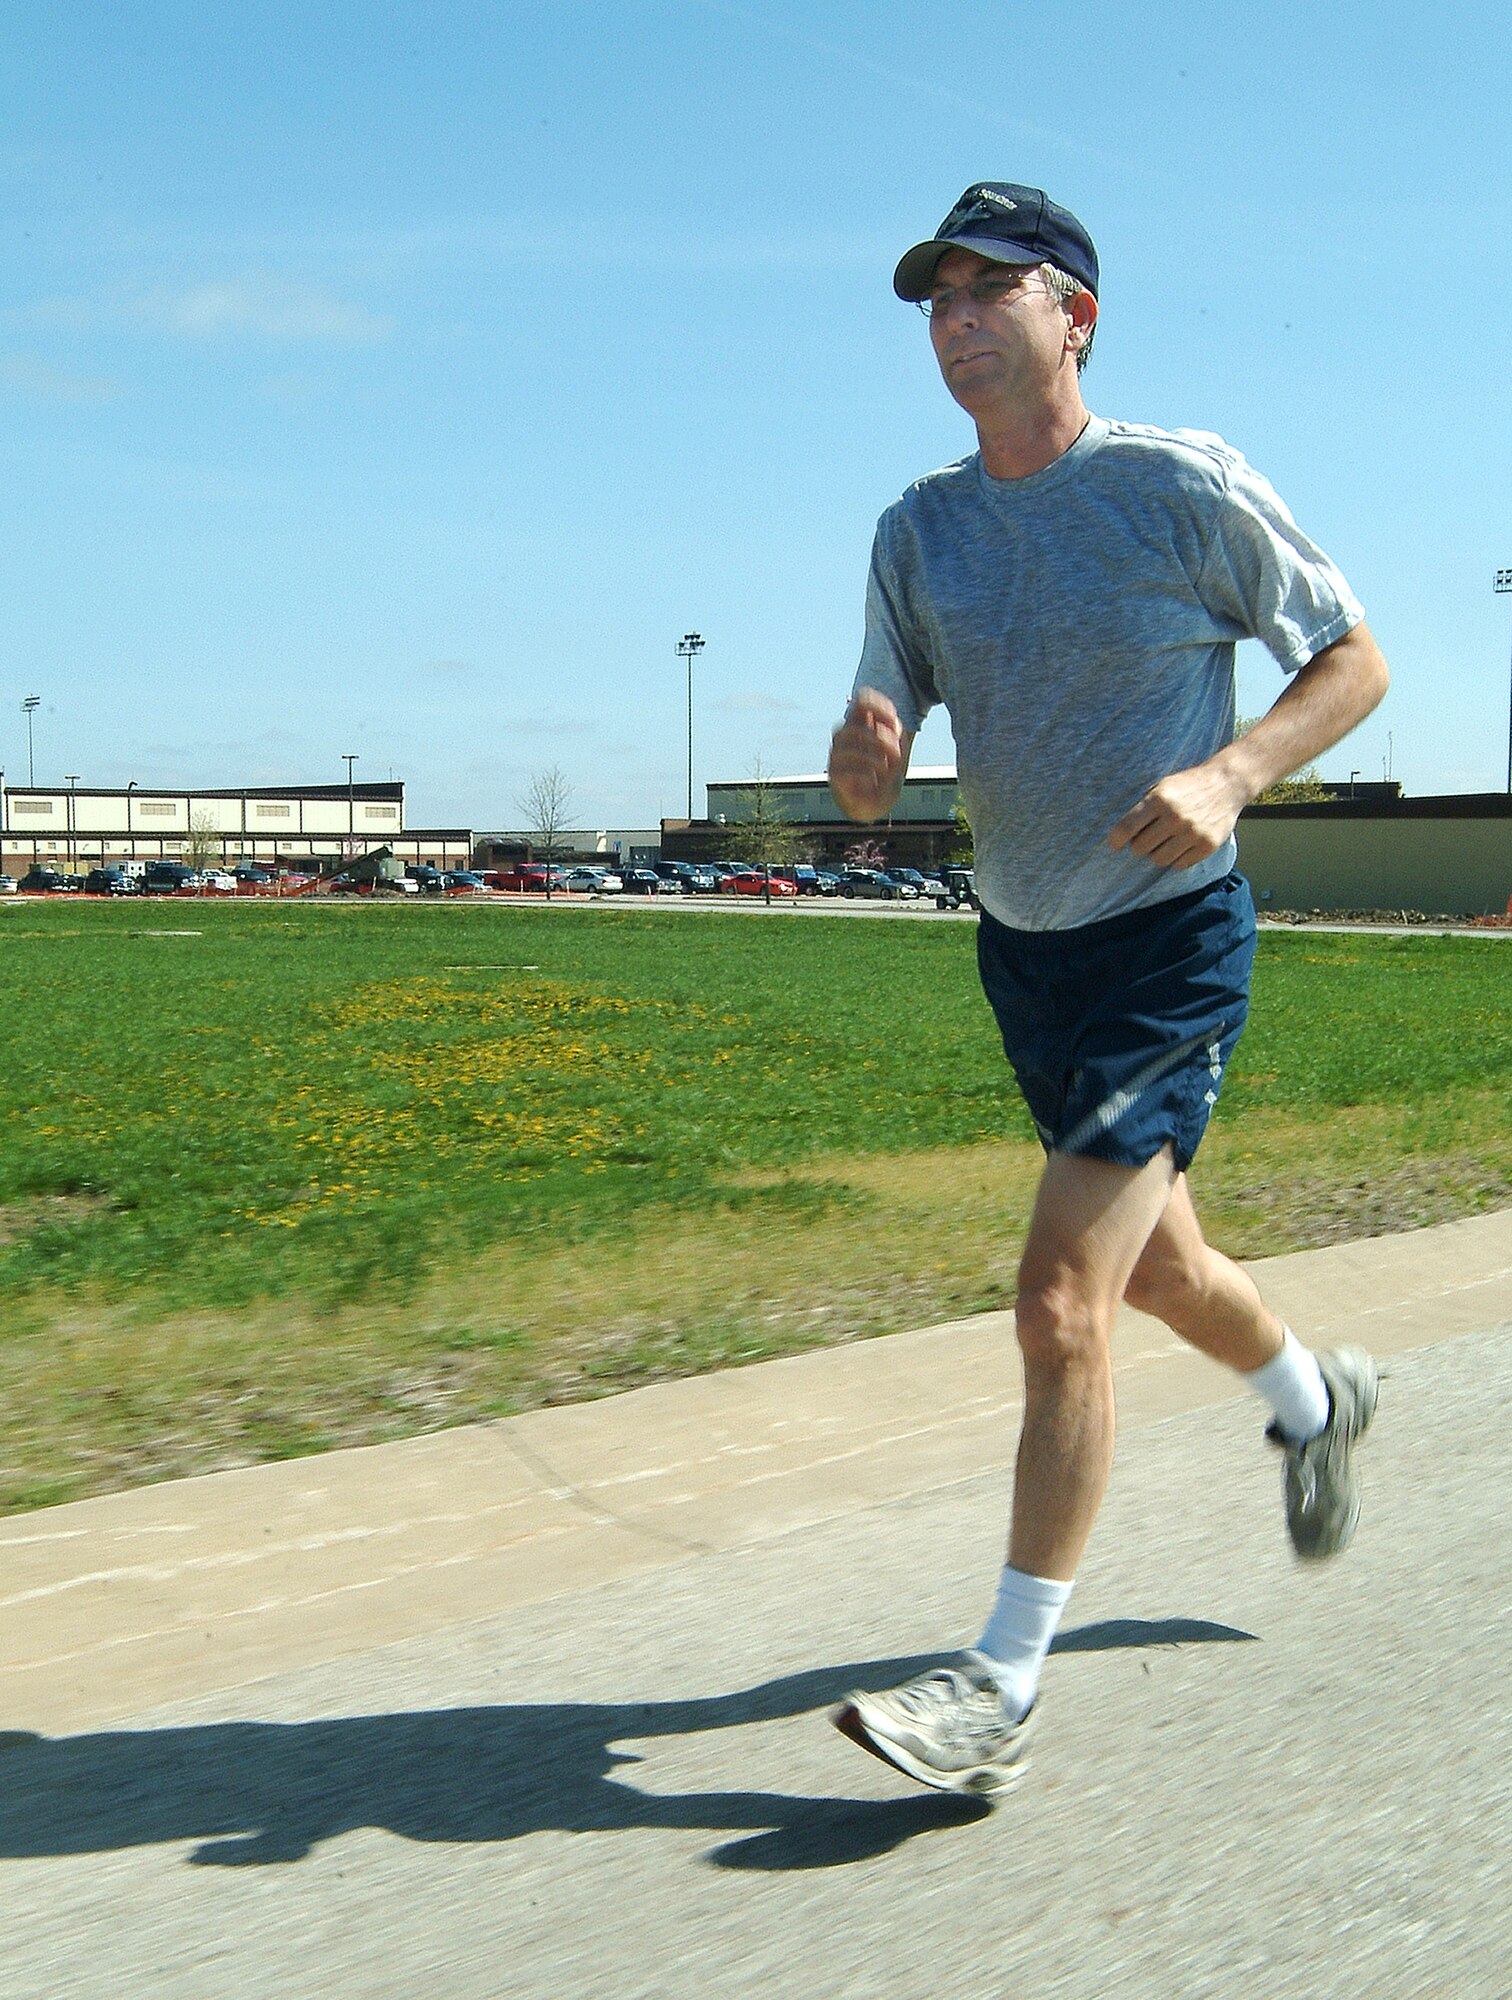 Senior Master Sgt. Mark Mock, a reservist from the 442nd Maintenance Squadron, jogs at Whiteman Air Force Base, Mo., to stay in shape.  He, along with 17 other Citizen Airmen from the 442nd Fighter Wing, has scored a perfect score on the Air Force fitness test.  (U.S. Air Force photo/Master Sgt. William Huntington)